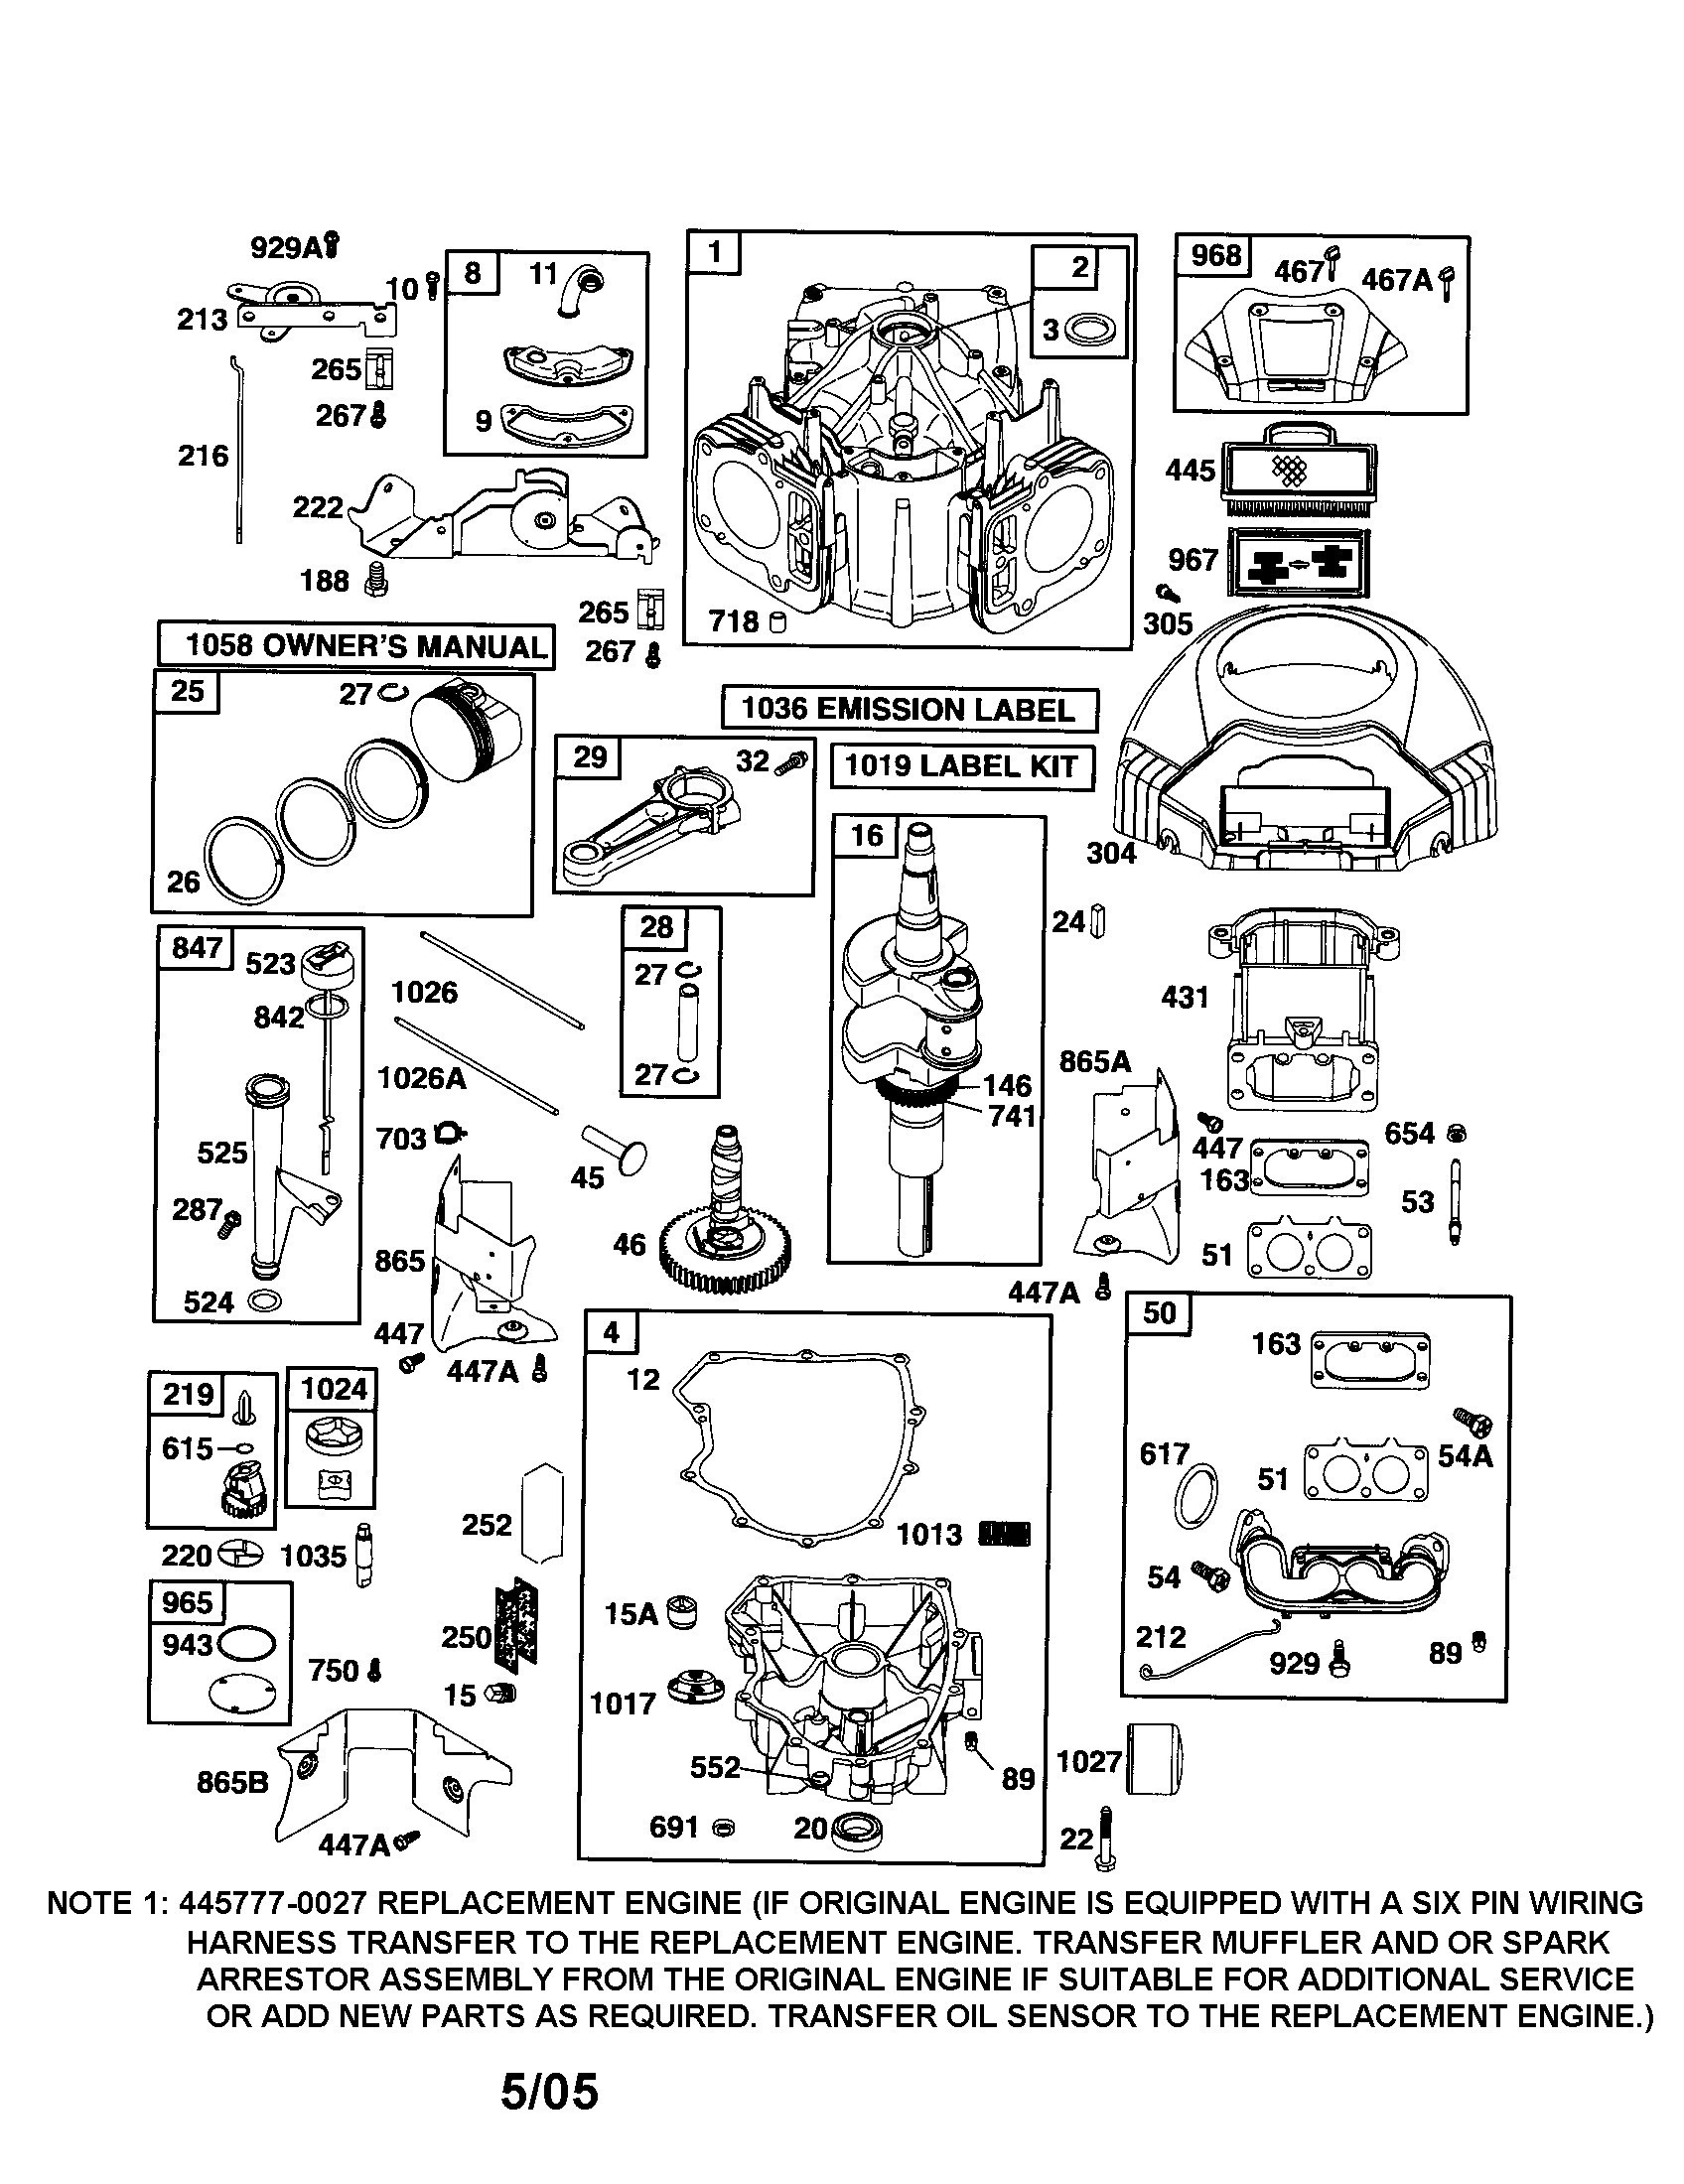 Briggs And Stratton V Twin Wiring Diagram Best Lovely Outstanding Engine